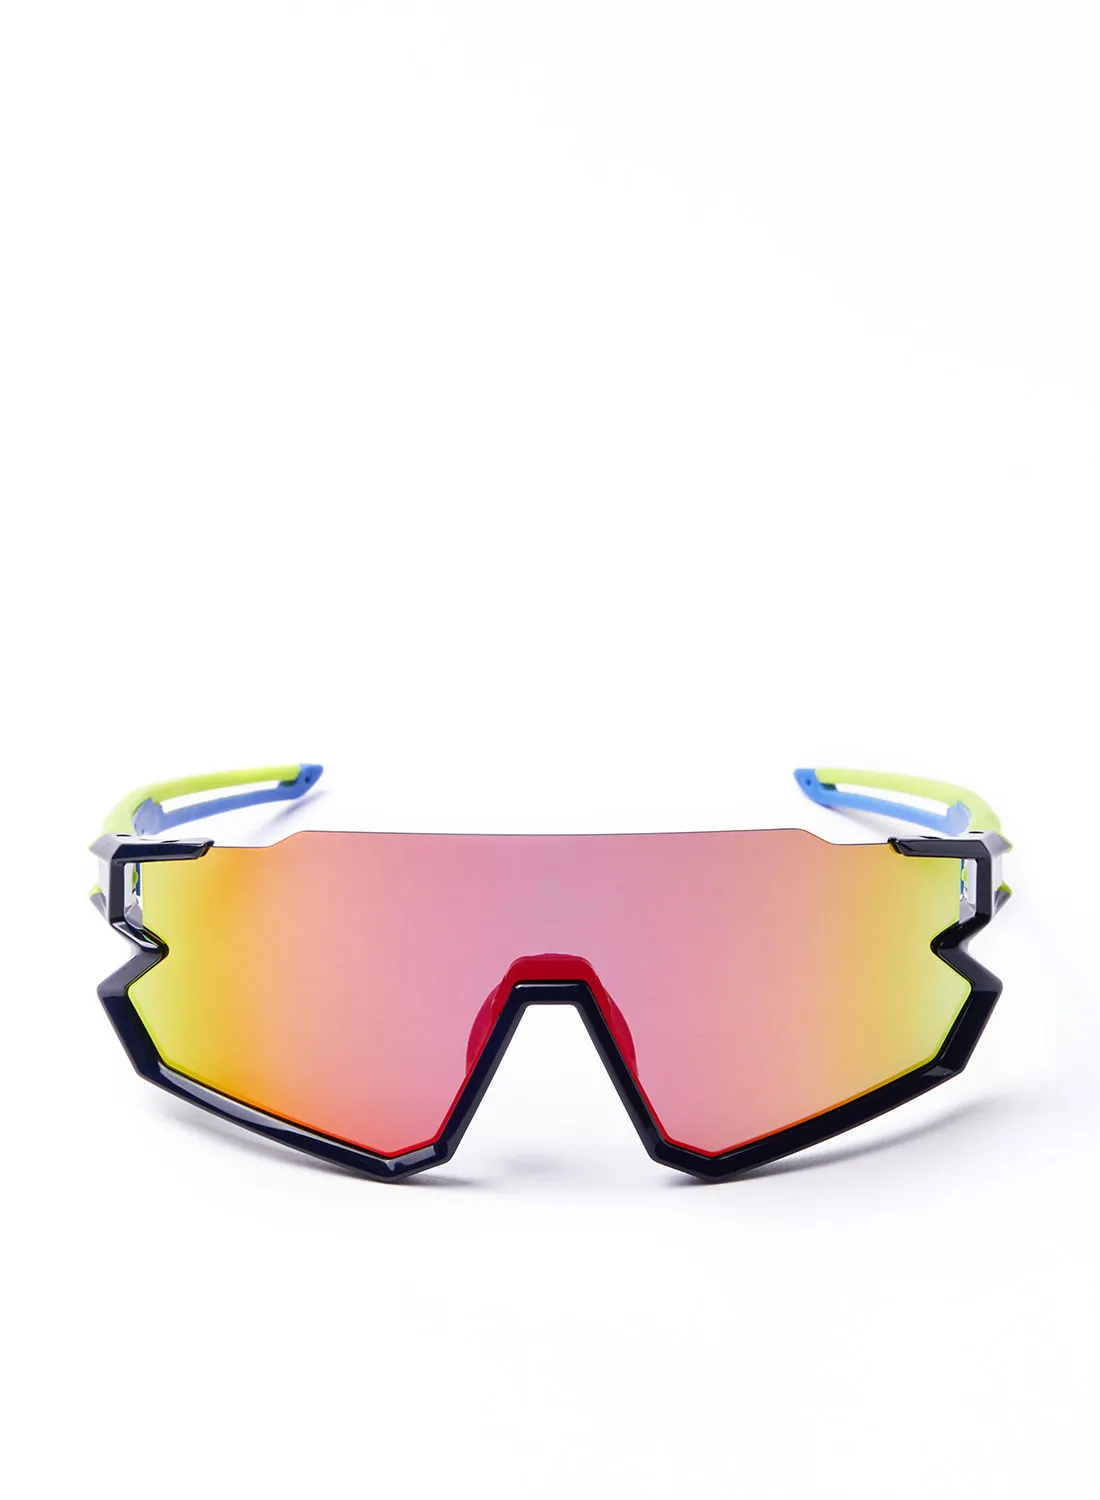 Athletiq Cycling Scooter Sunglasses - Athletiq Club Jebel Jais - Blue And Yellow Frame With Red Fire Multilayer Lens